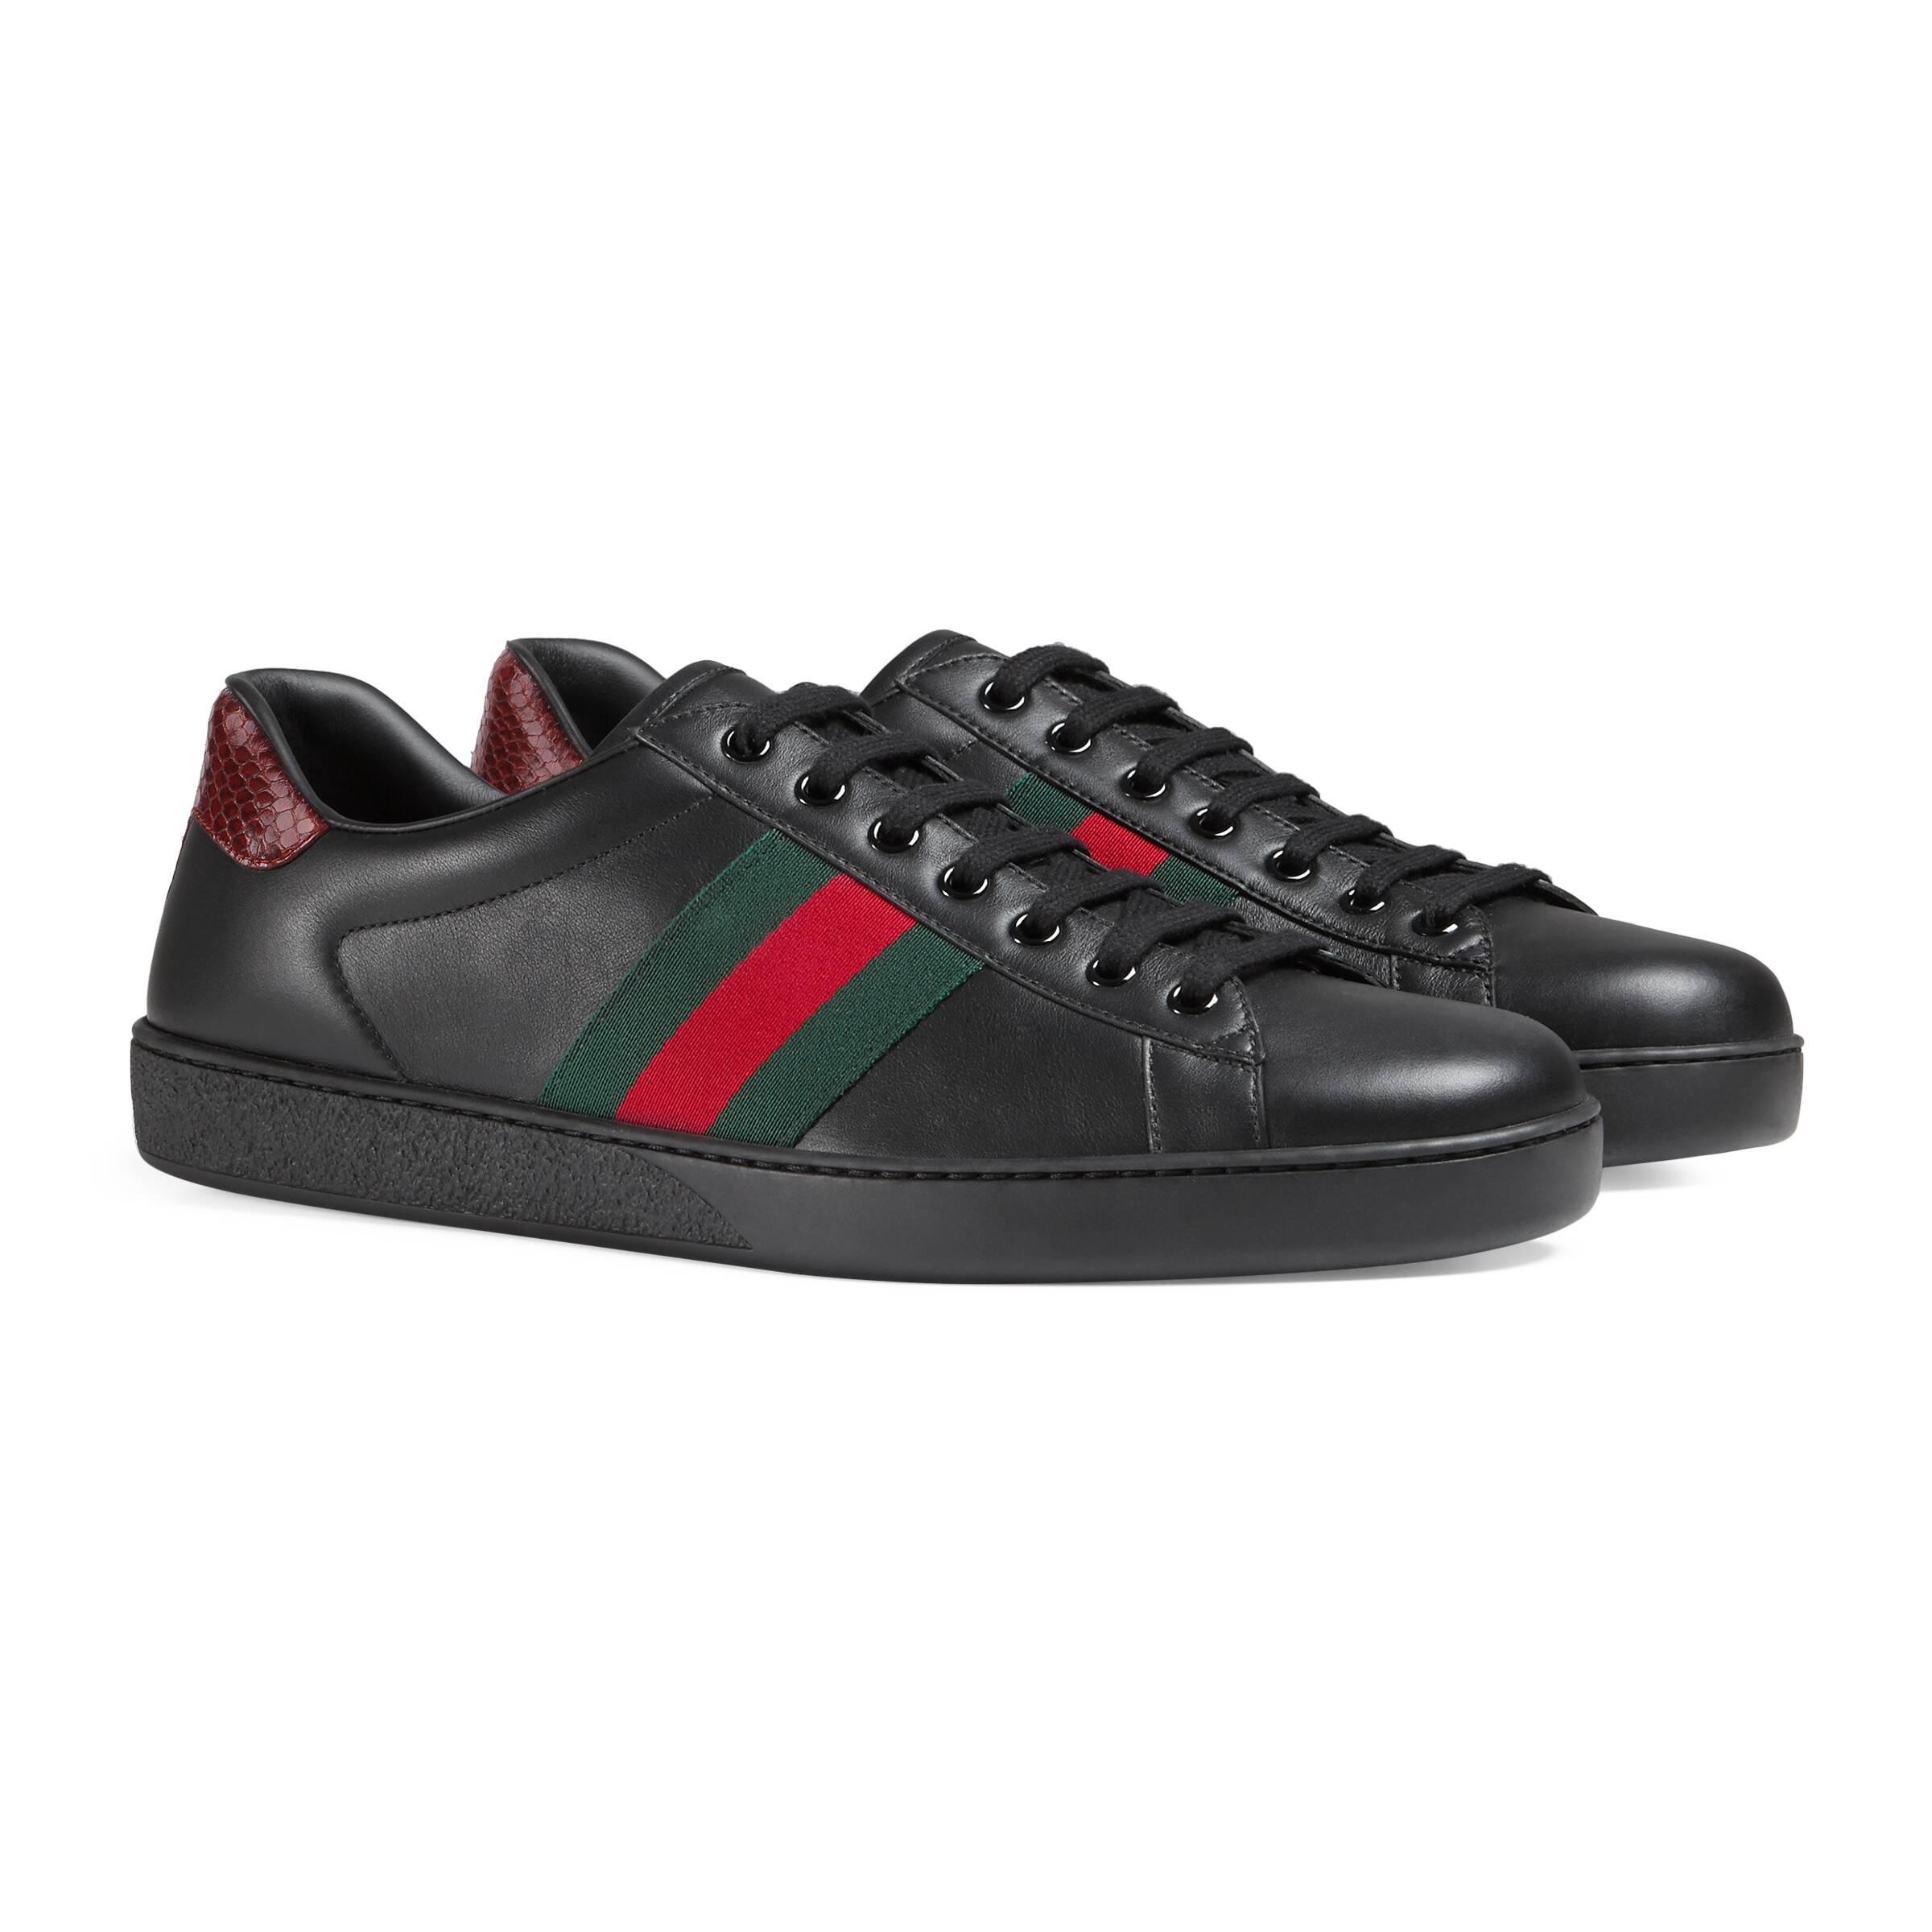 Gucci Leather Ace Embroidered Low-top Sneaker in Black - Lyst